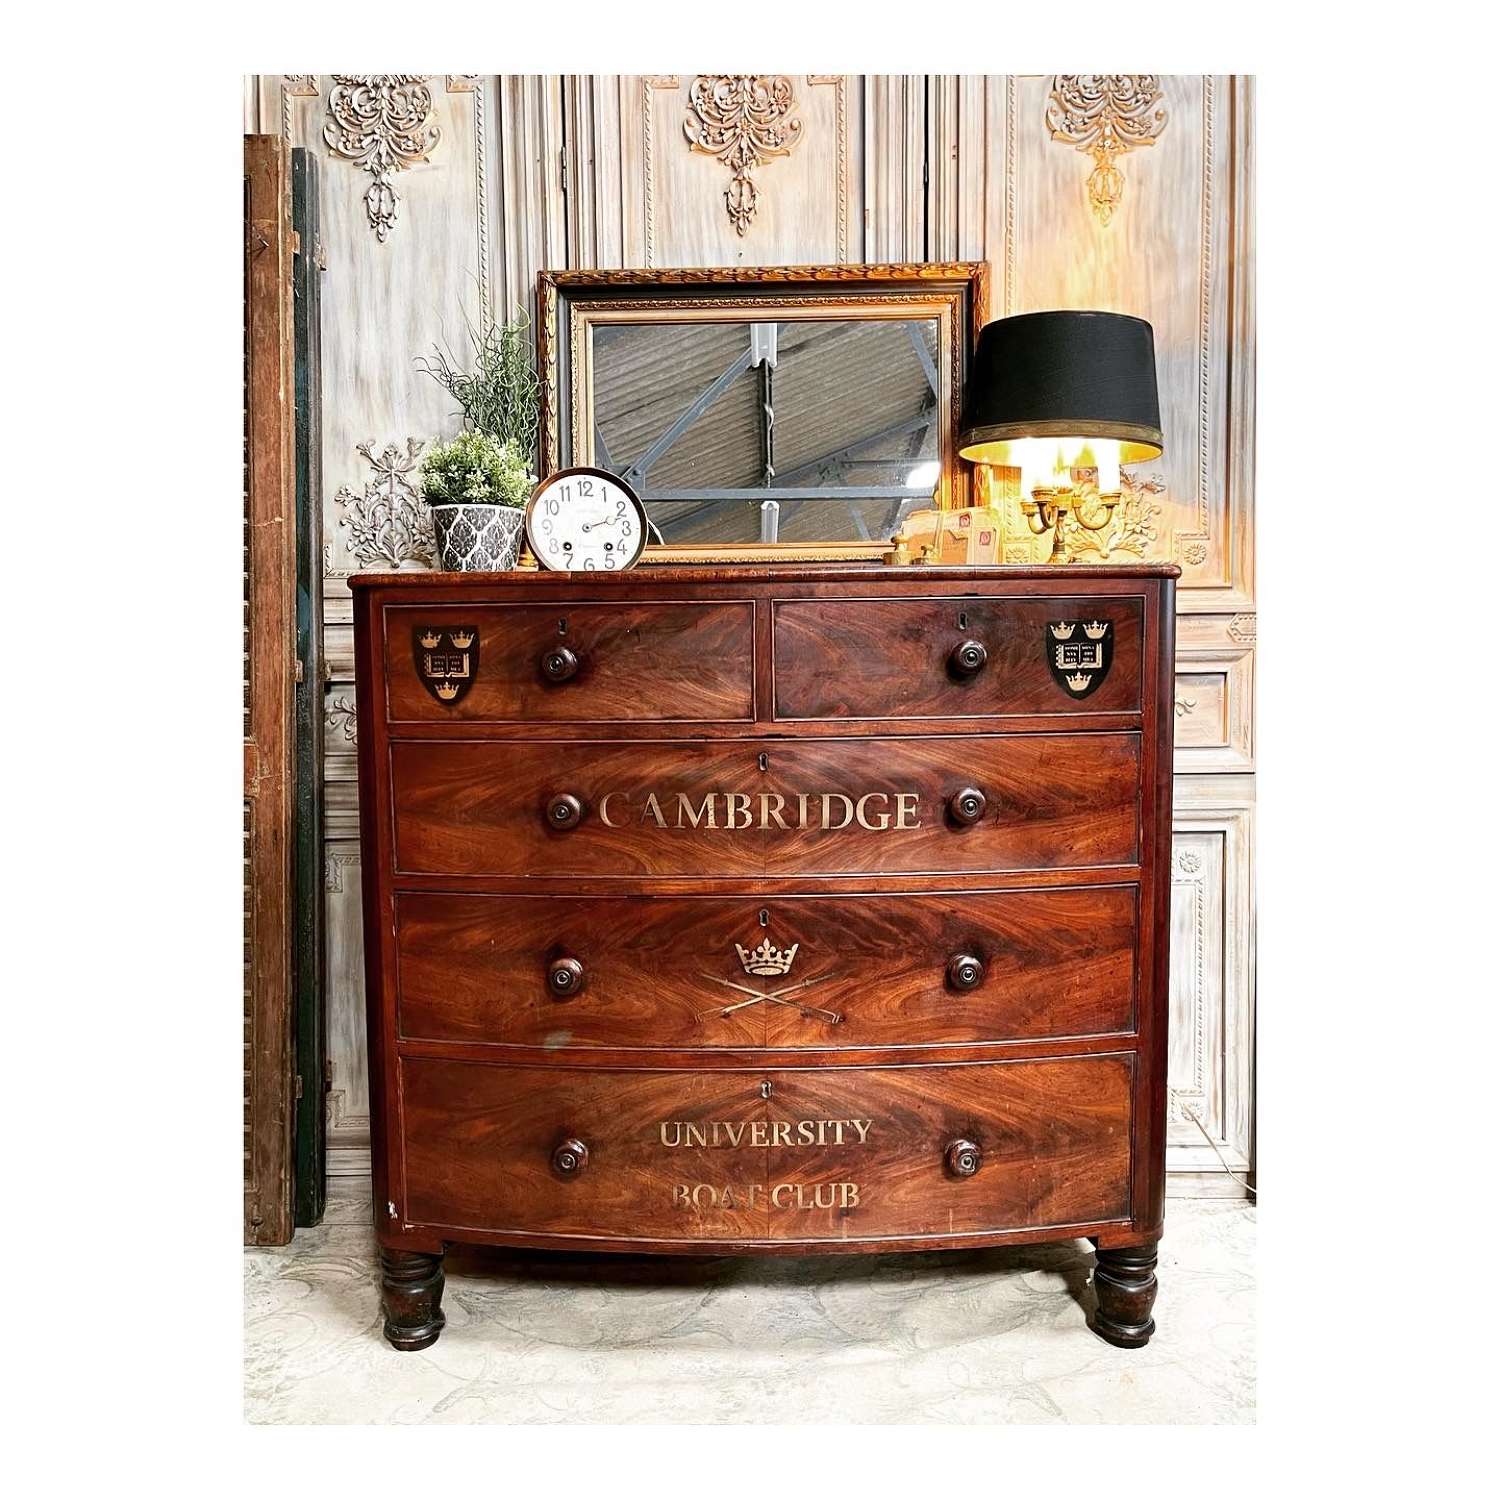 Victorian Mahogany Bow Front Chest of Drawers